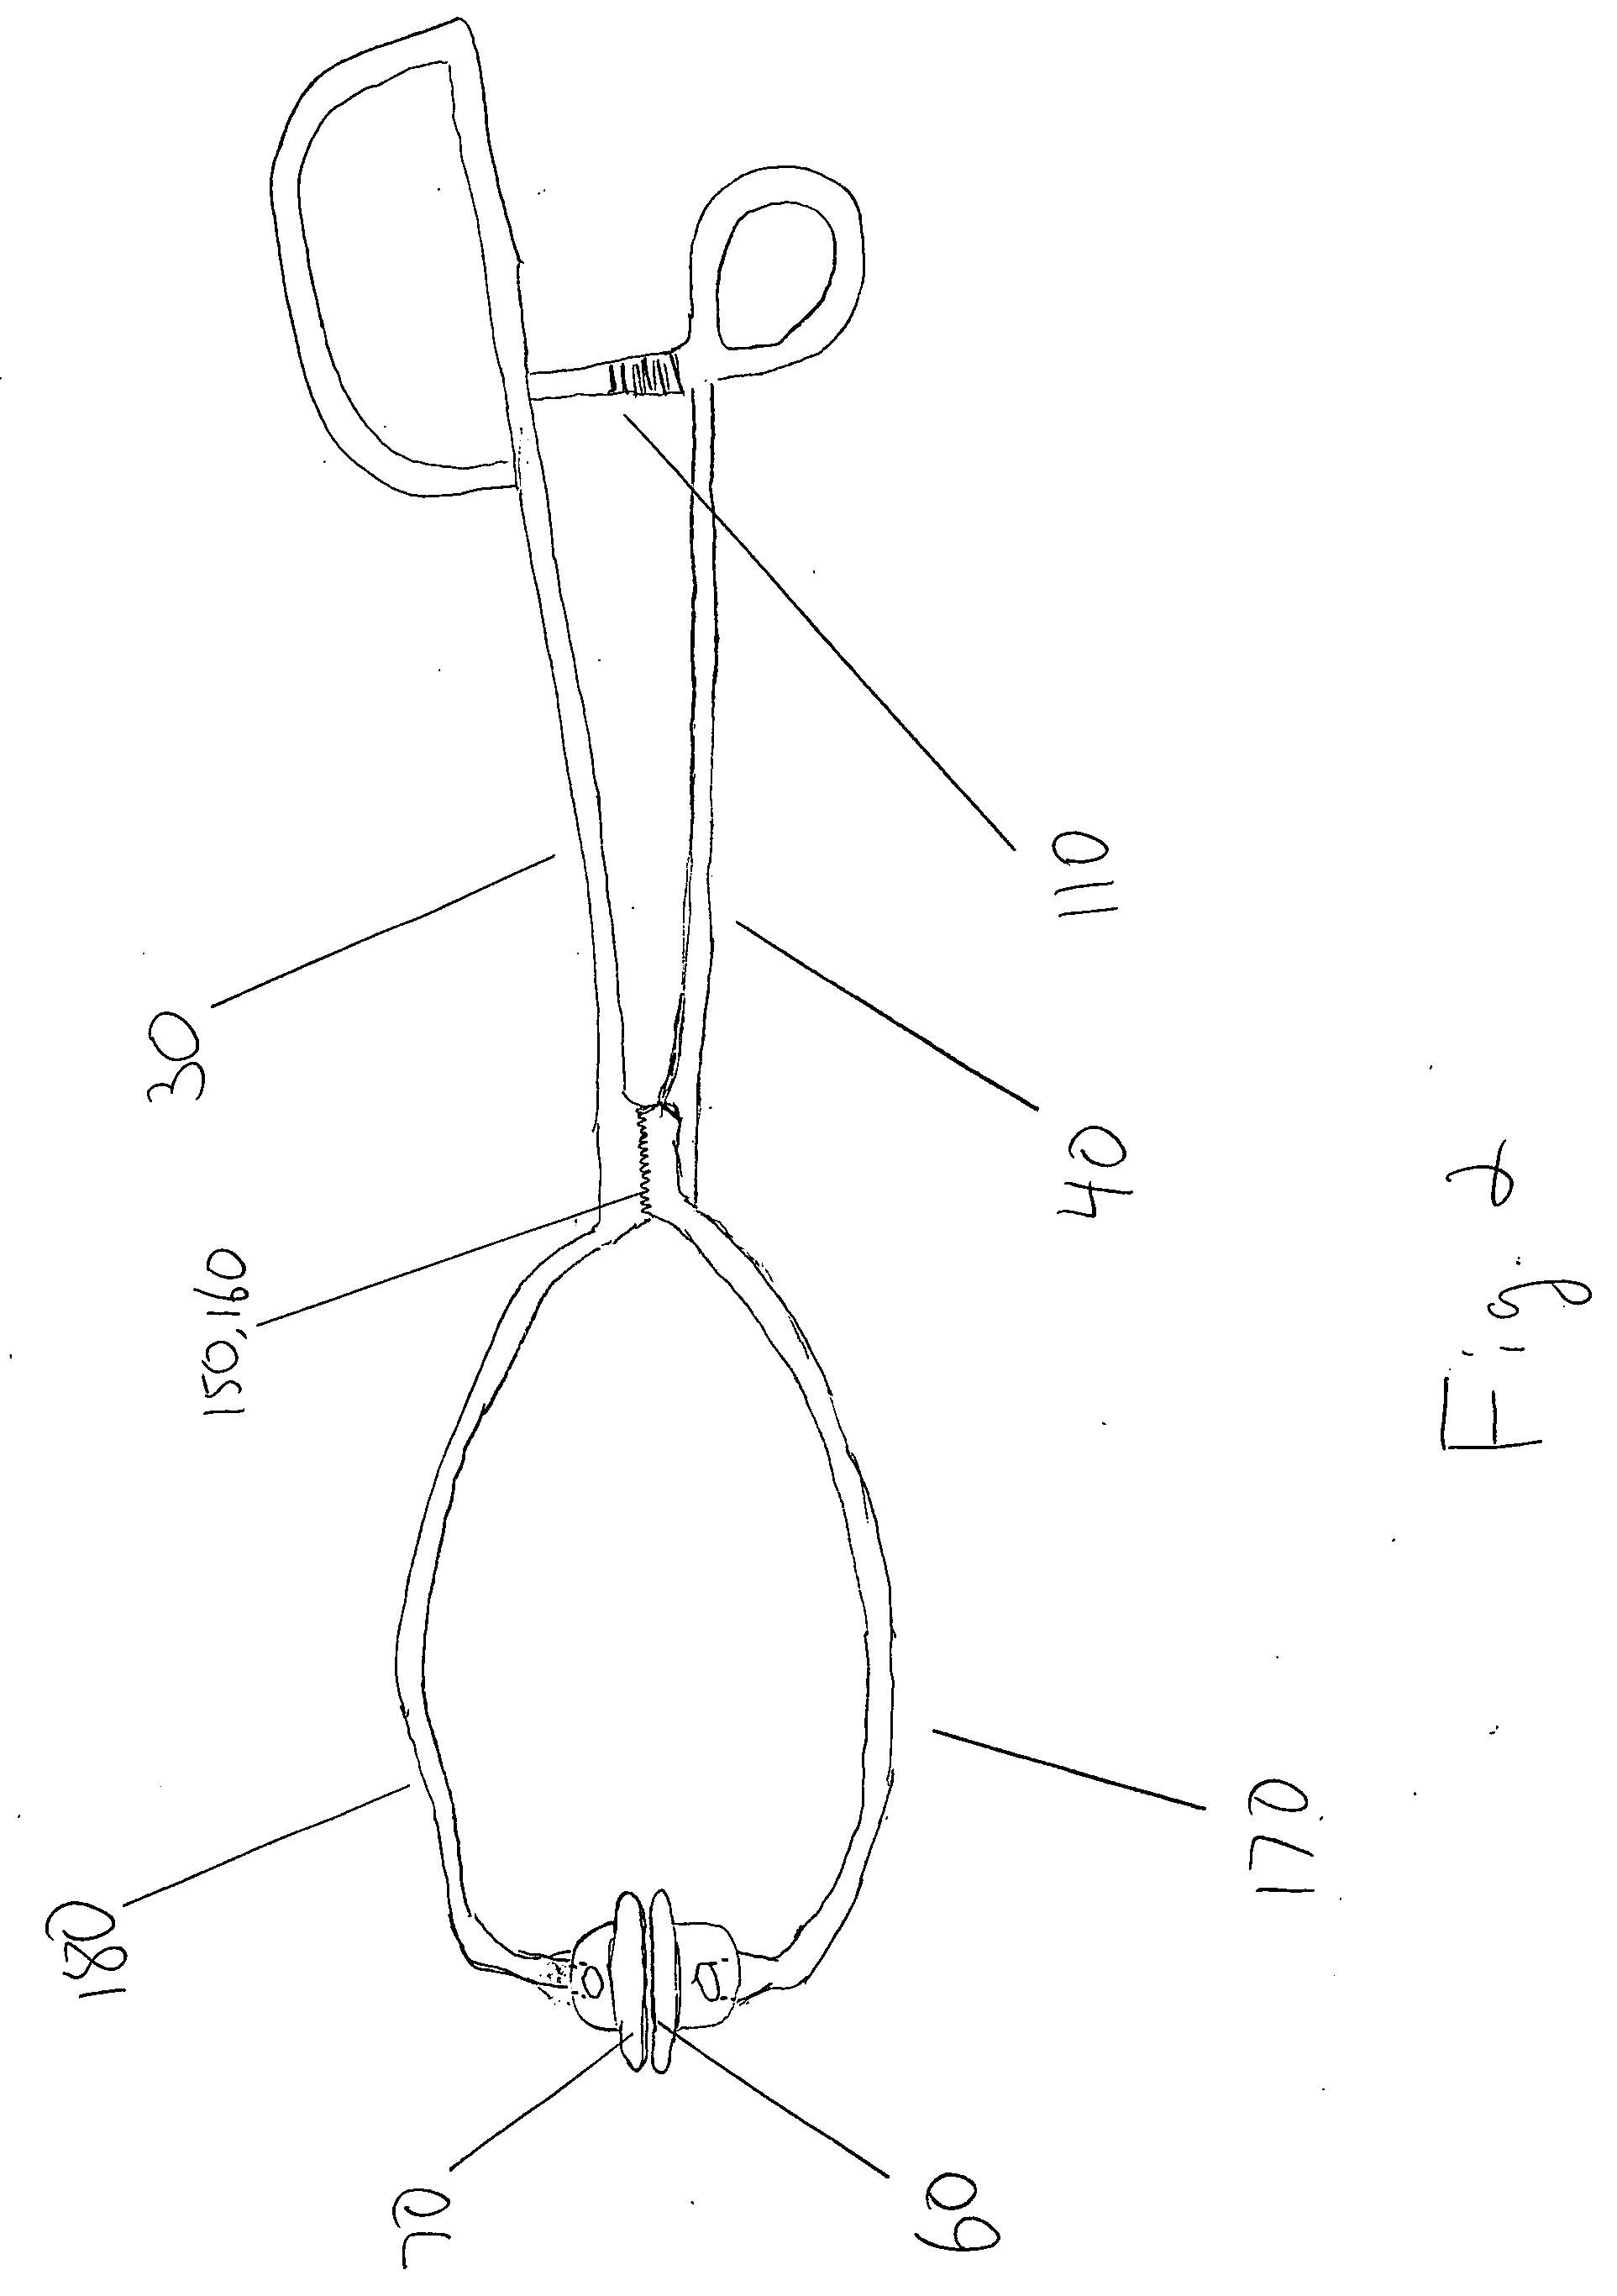 Device for holding fish